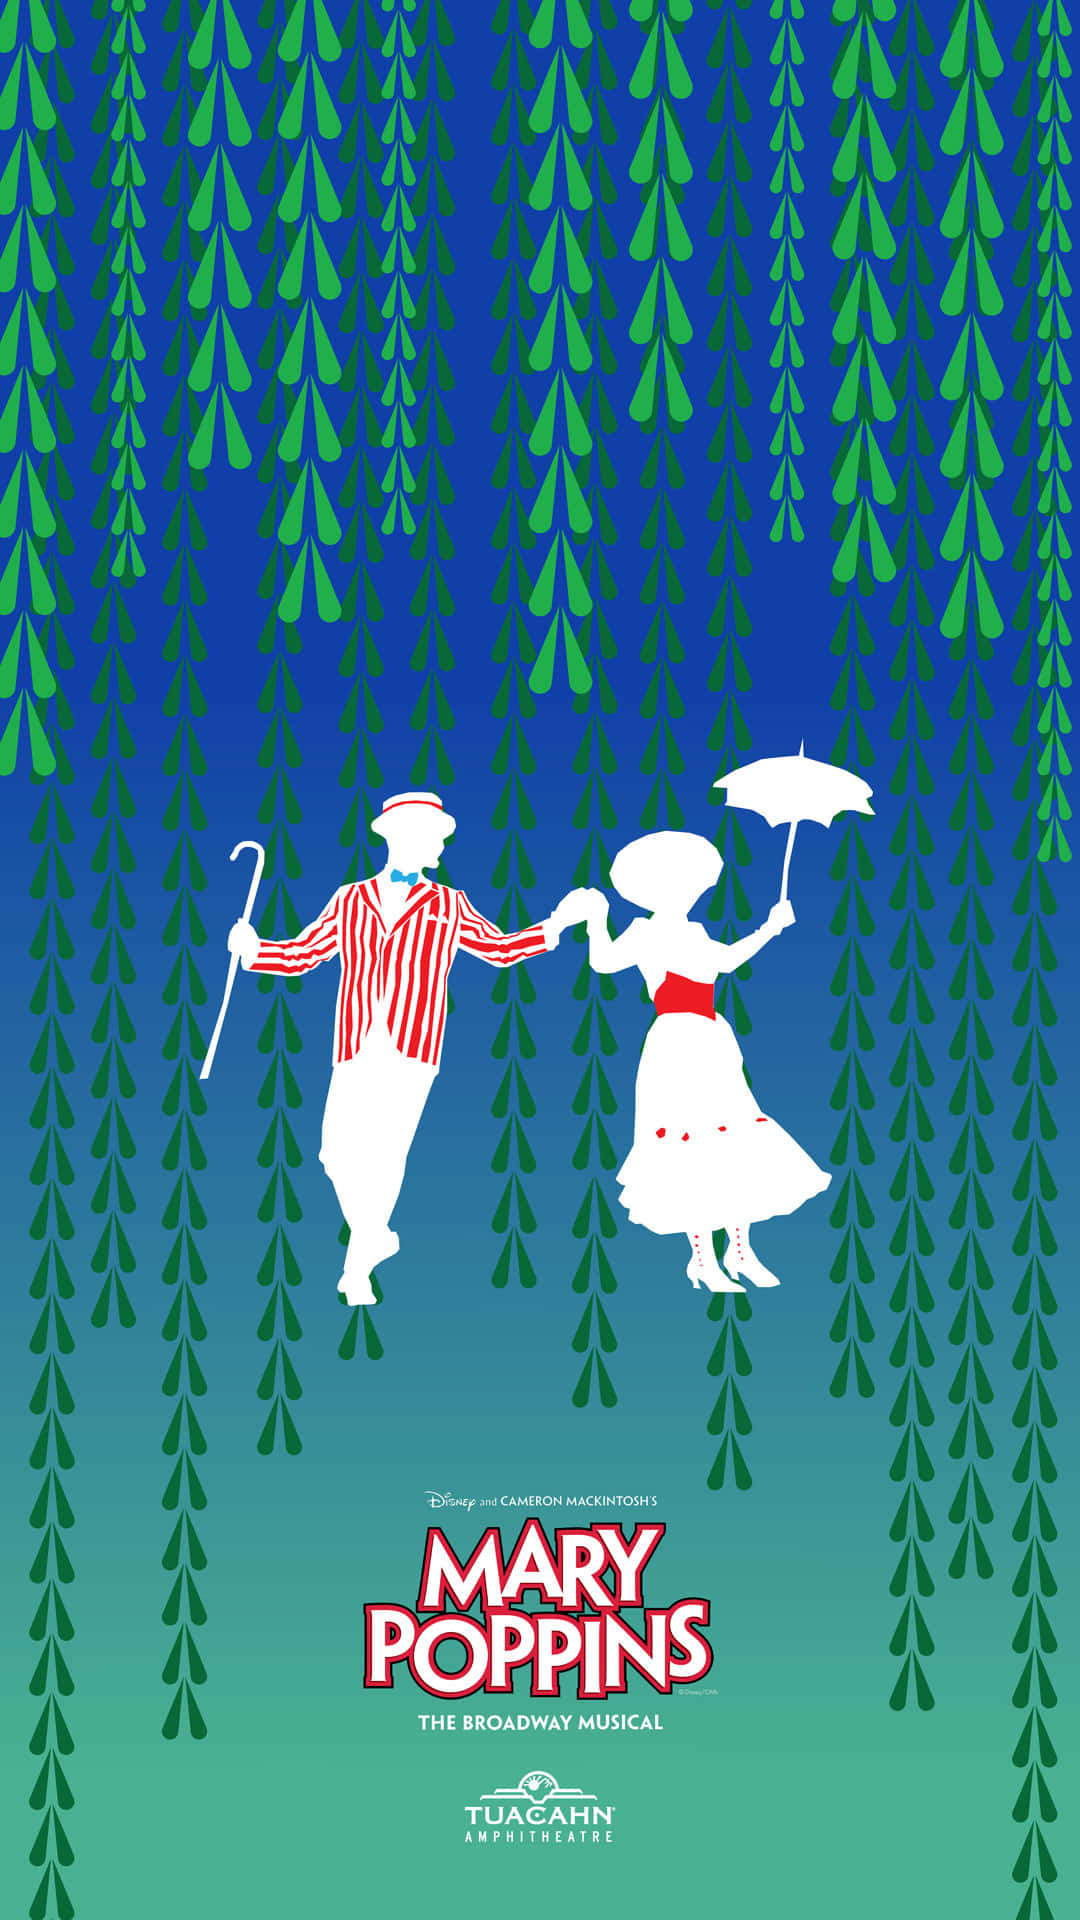 Mary Poppins Displayed In A Vibrant And Colorful Image